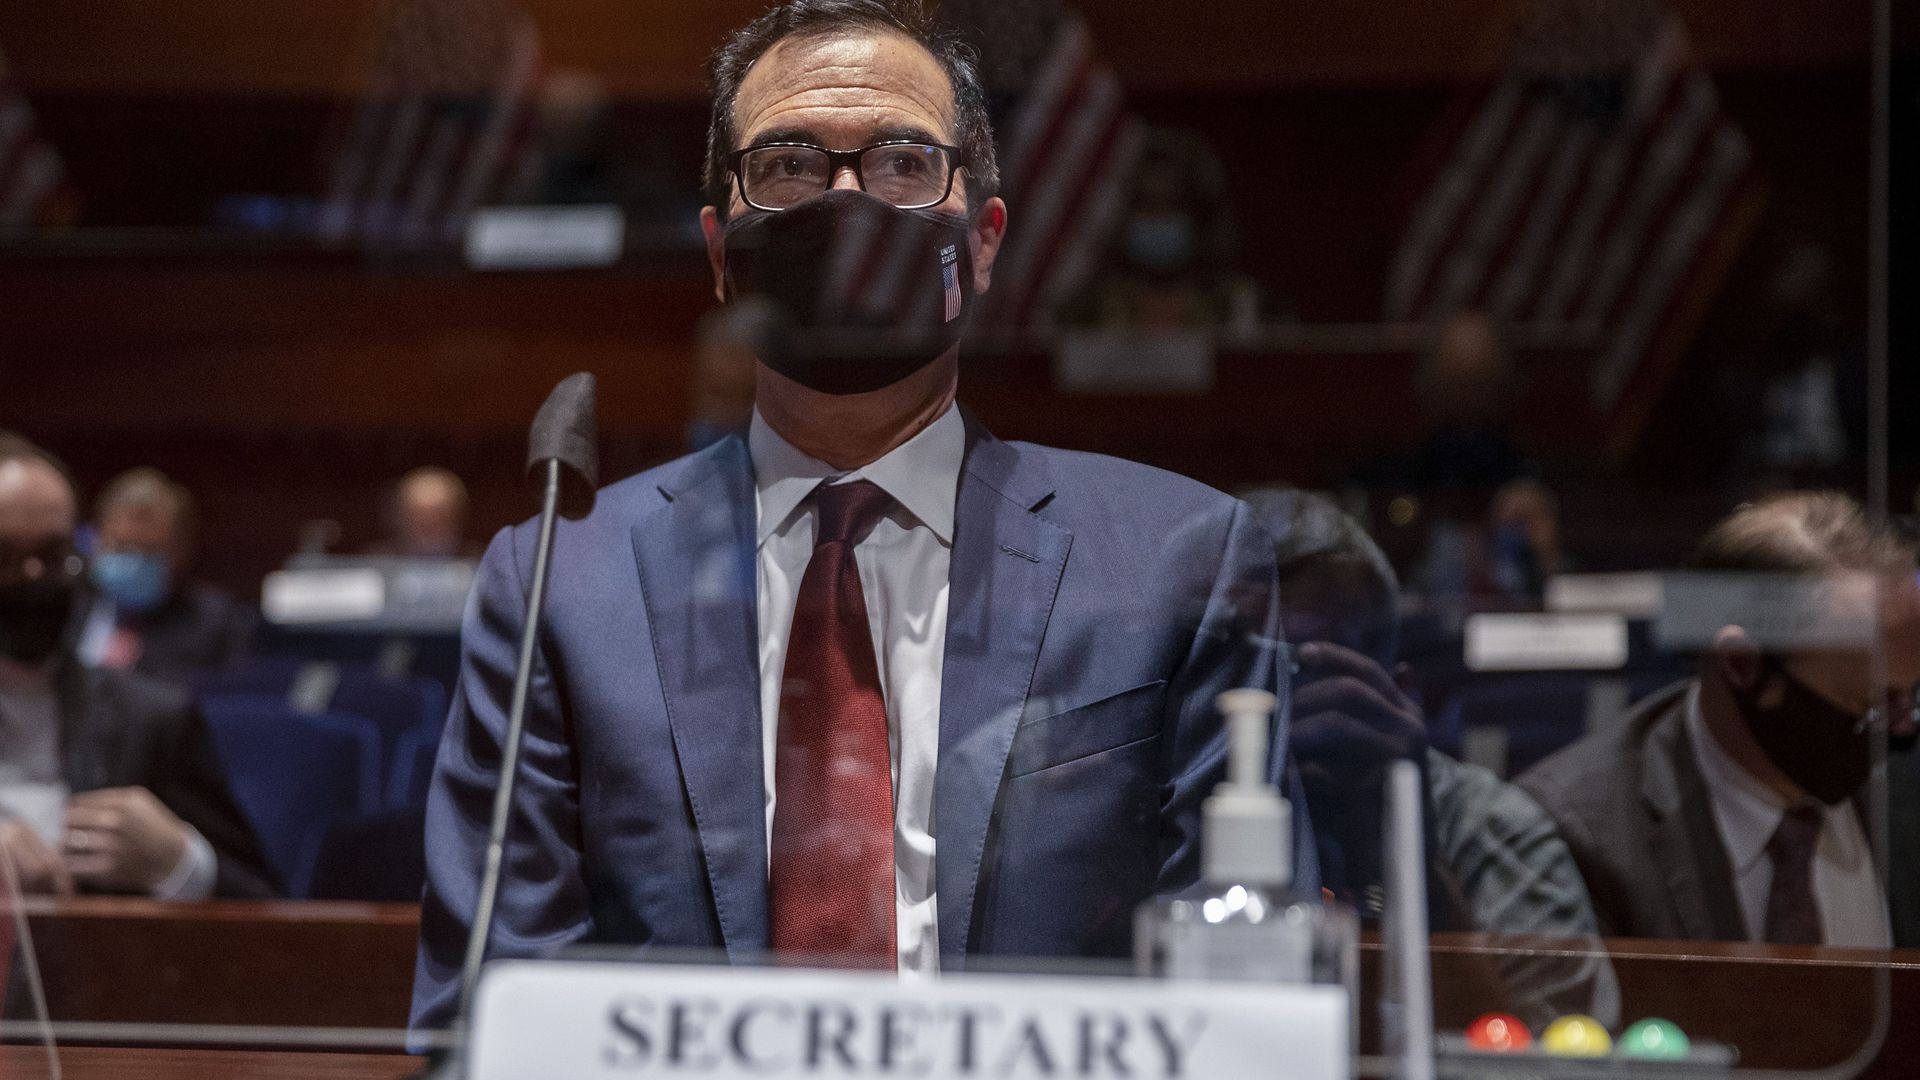 US Secretary of the Treasury Steven Mnuchin wears a mask behind a plexiglass barrier, preparing to testify before the House Financial Services Committee in Washington